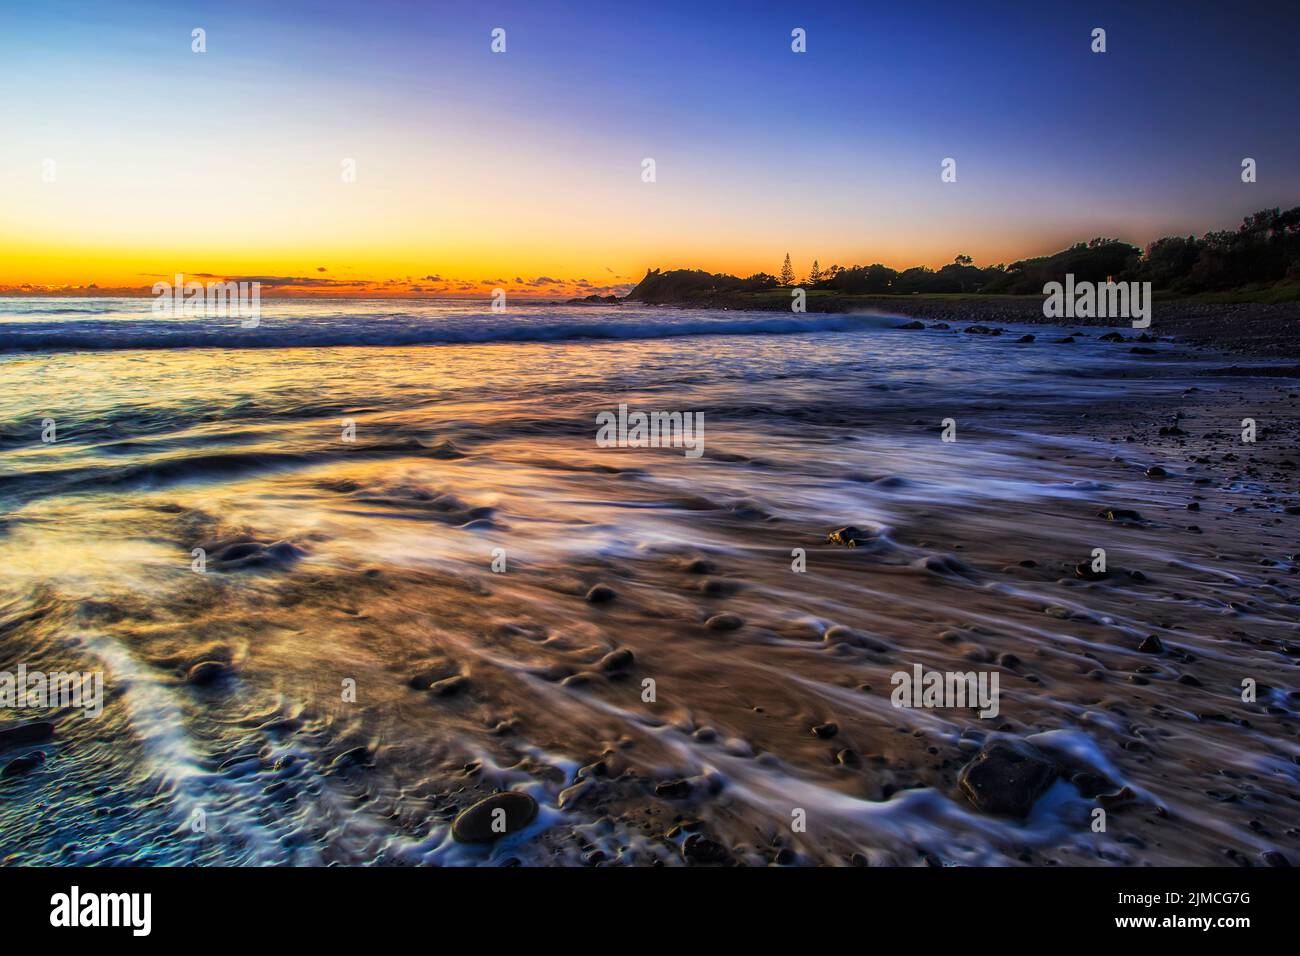 Pebbly beach on Pacific coast of Forster town in Australia at sunrise - scenic seascape. Stock Photo